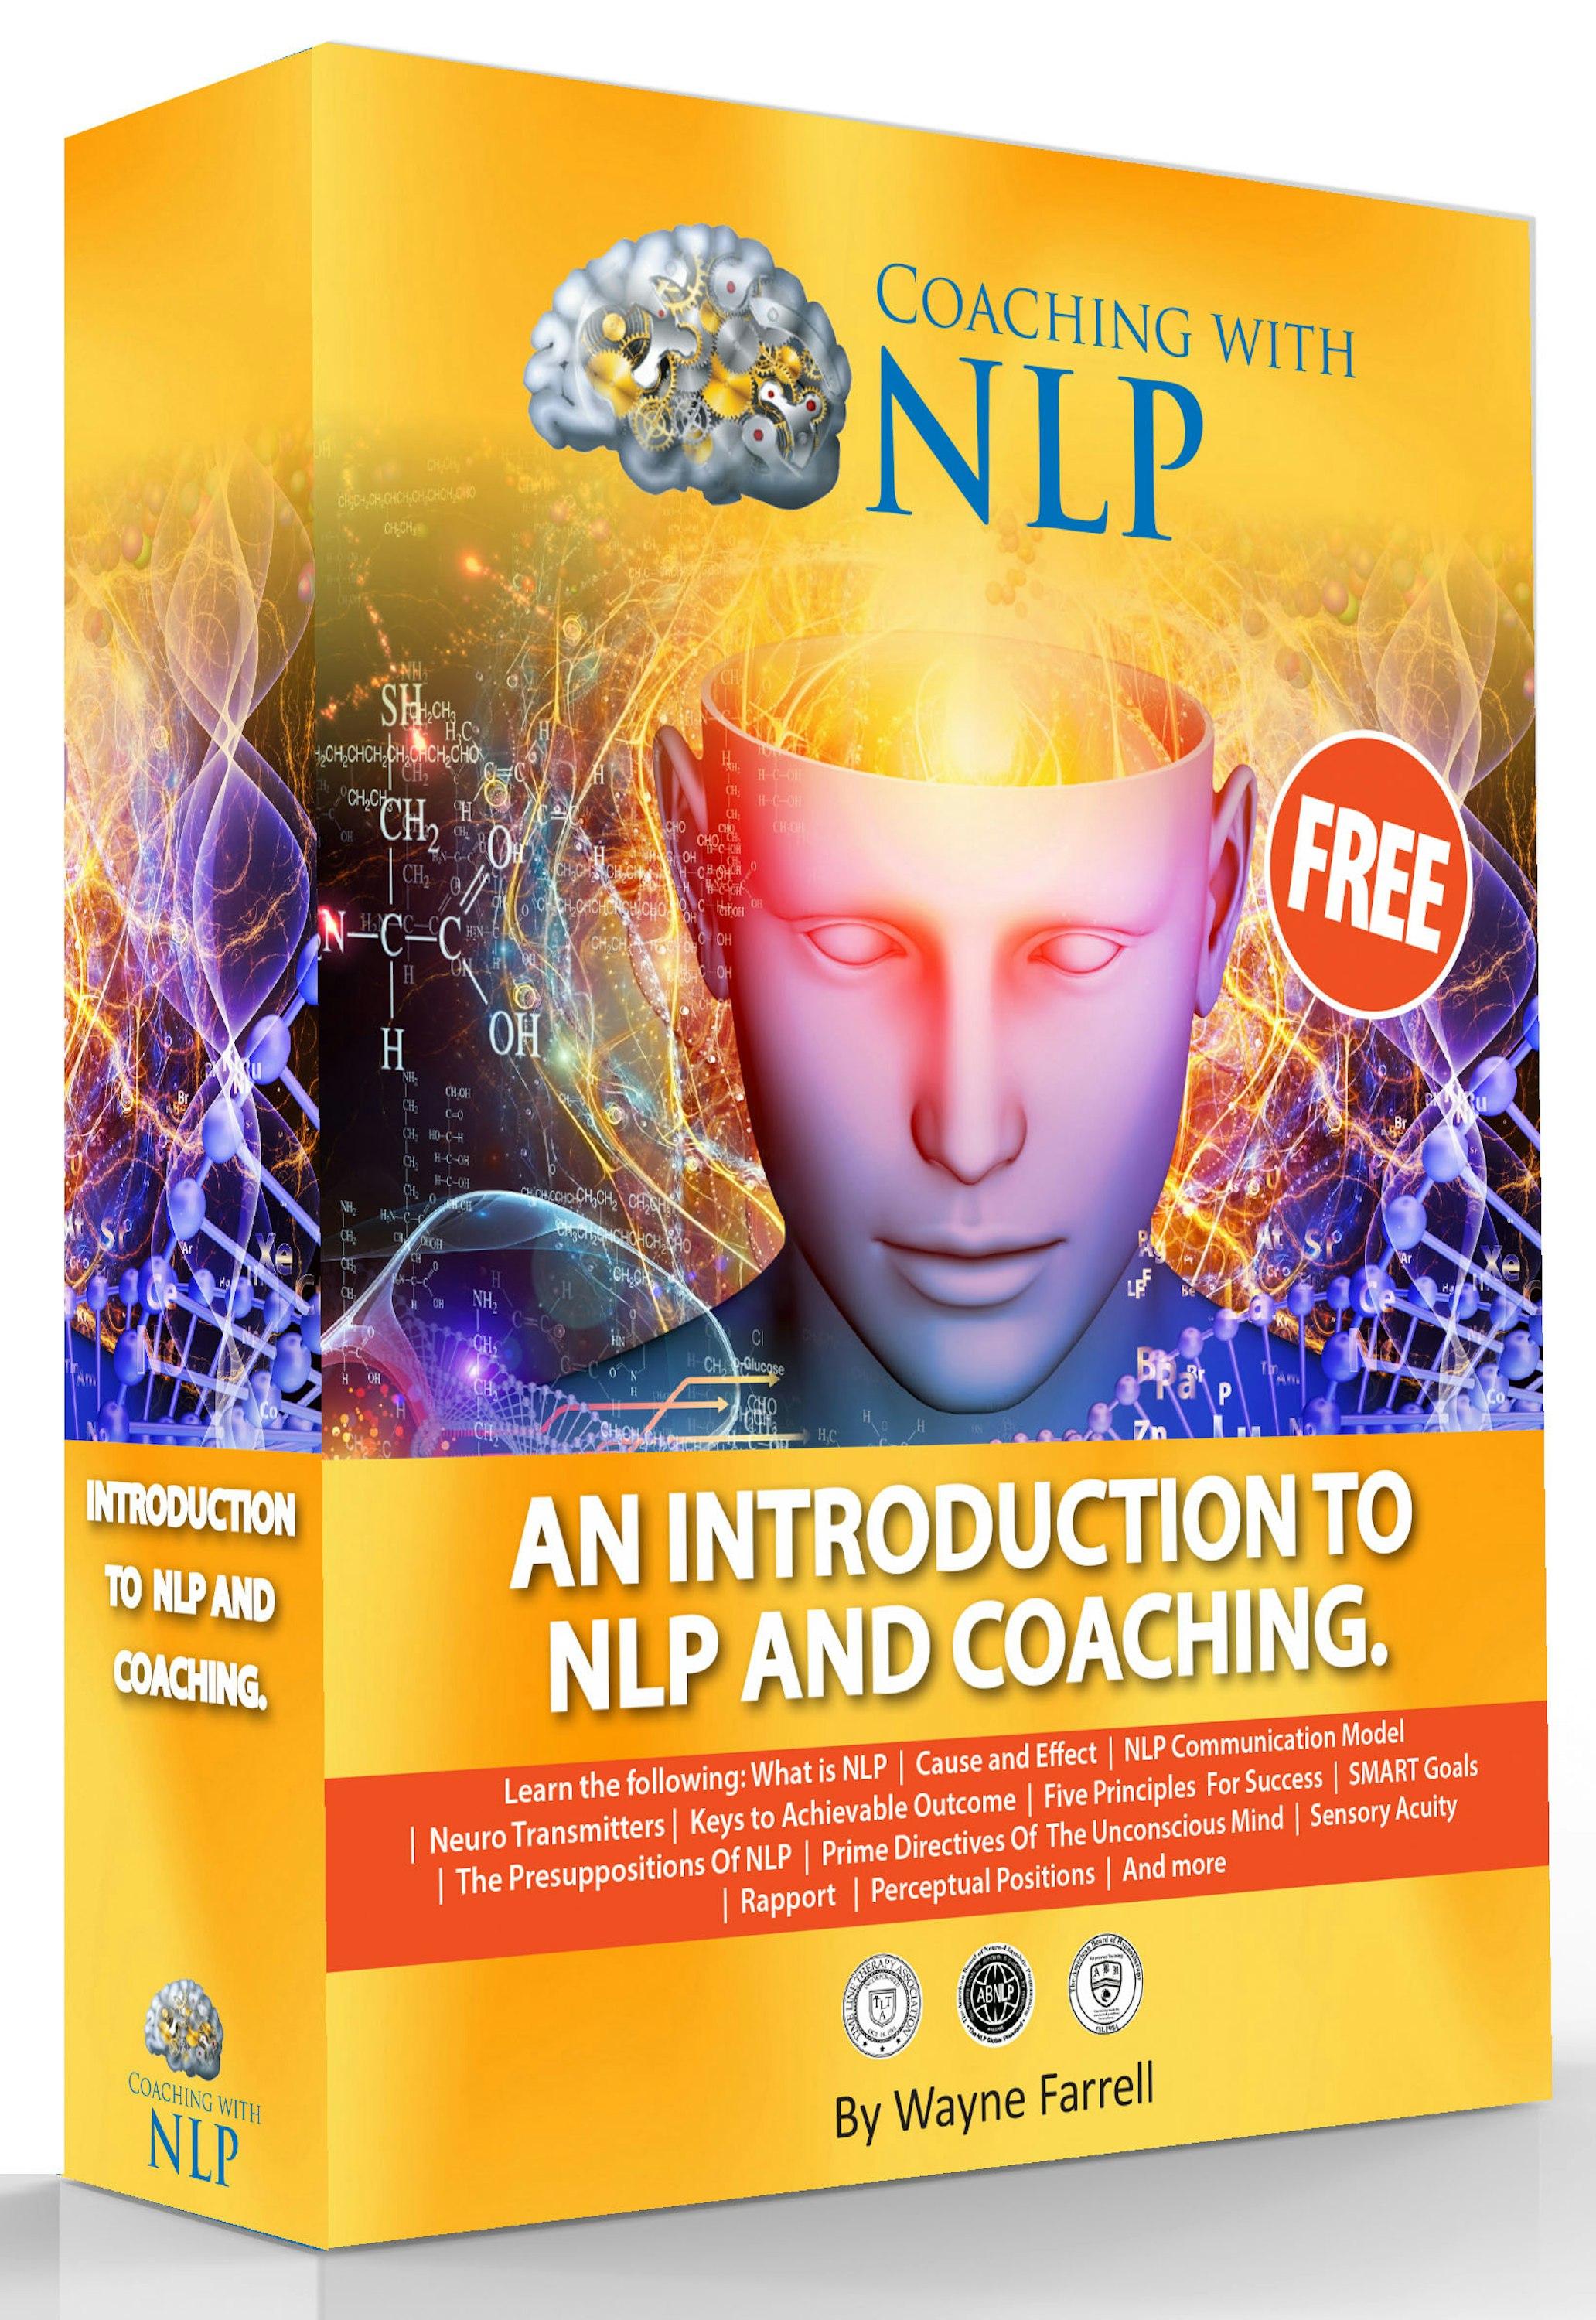 Track 9- Presuppositions of NLP